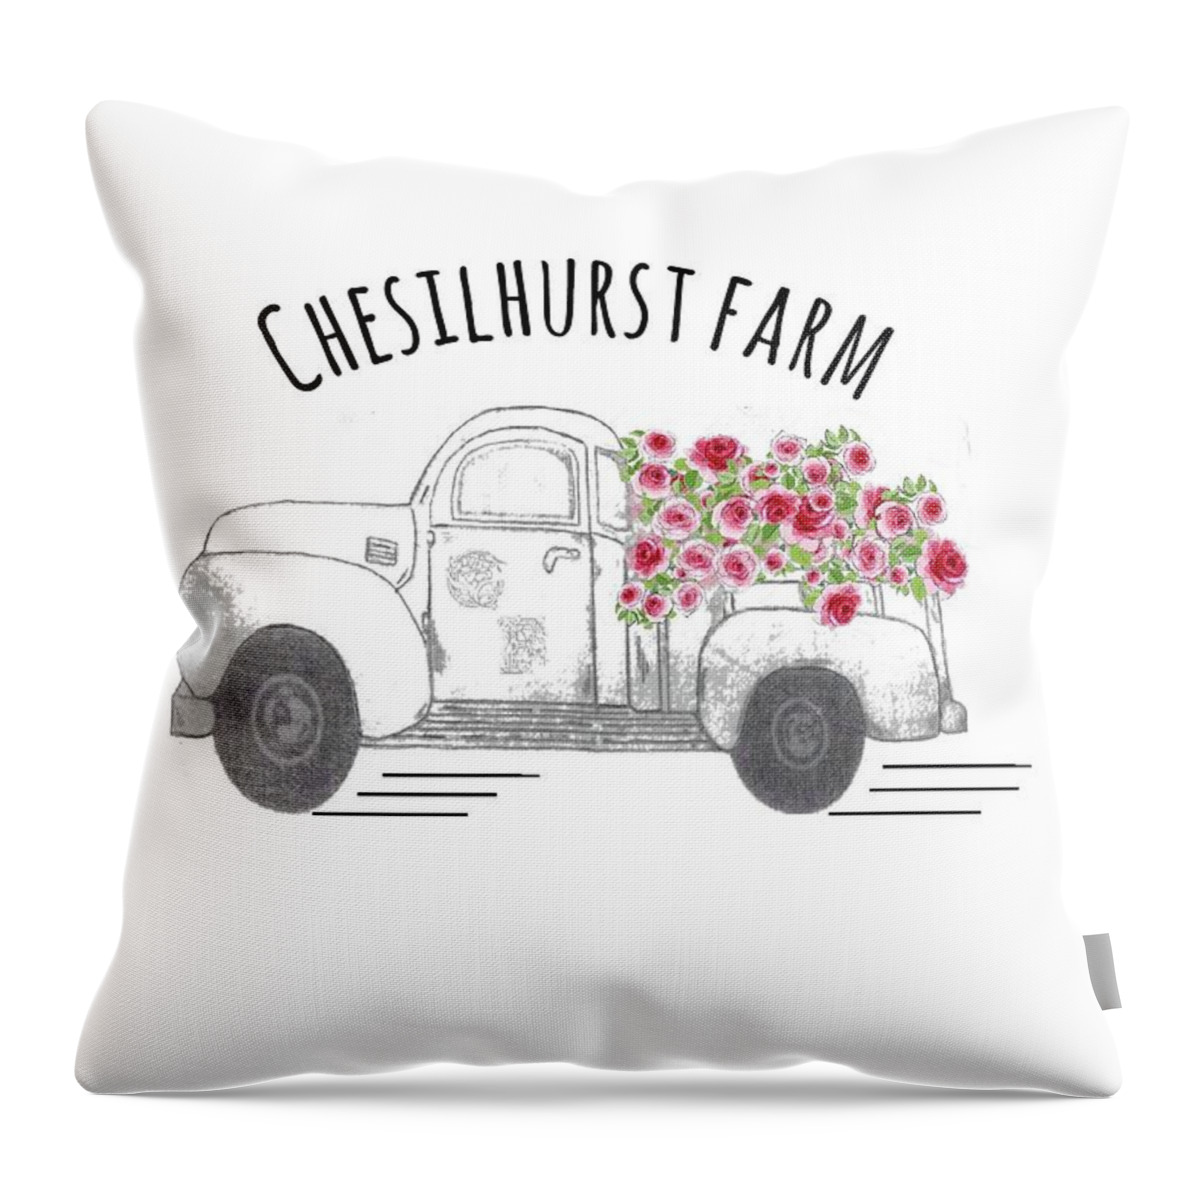 Chesilhurst Farm Throw Pillow featuring the drawing Chesilhurst Farm by Kim Kent